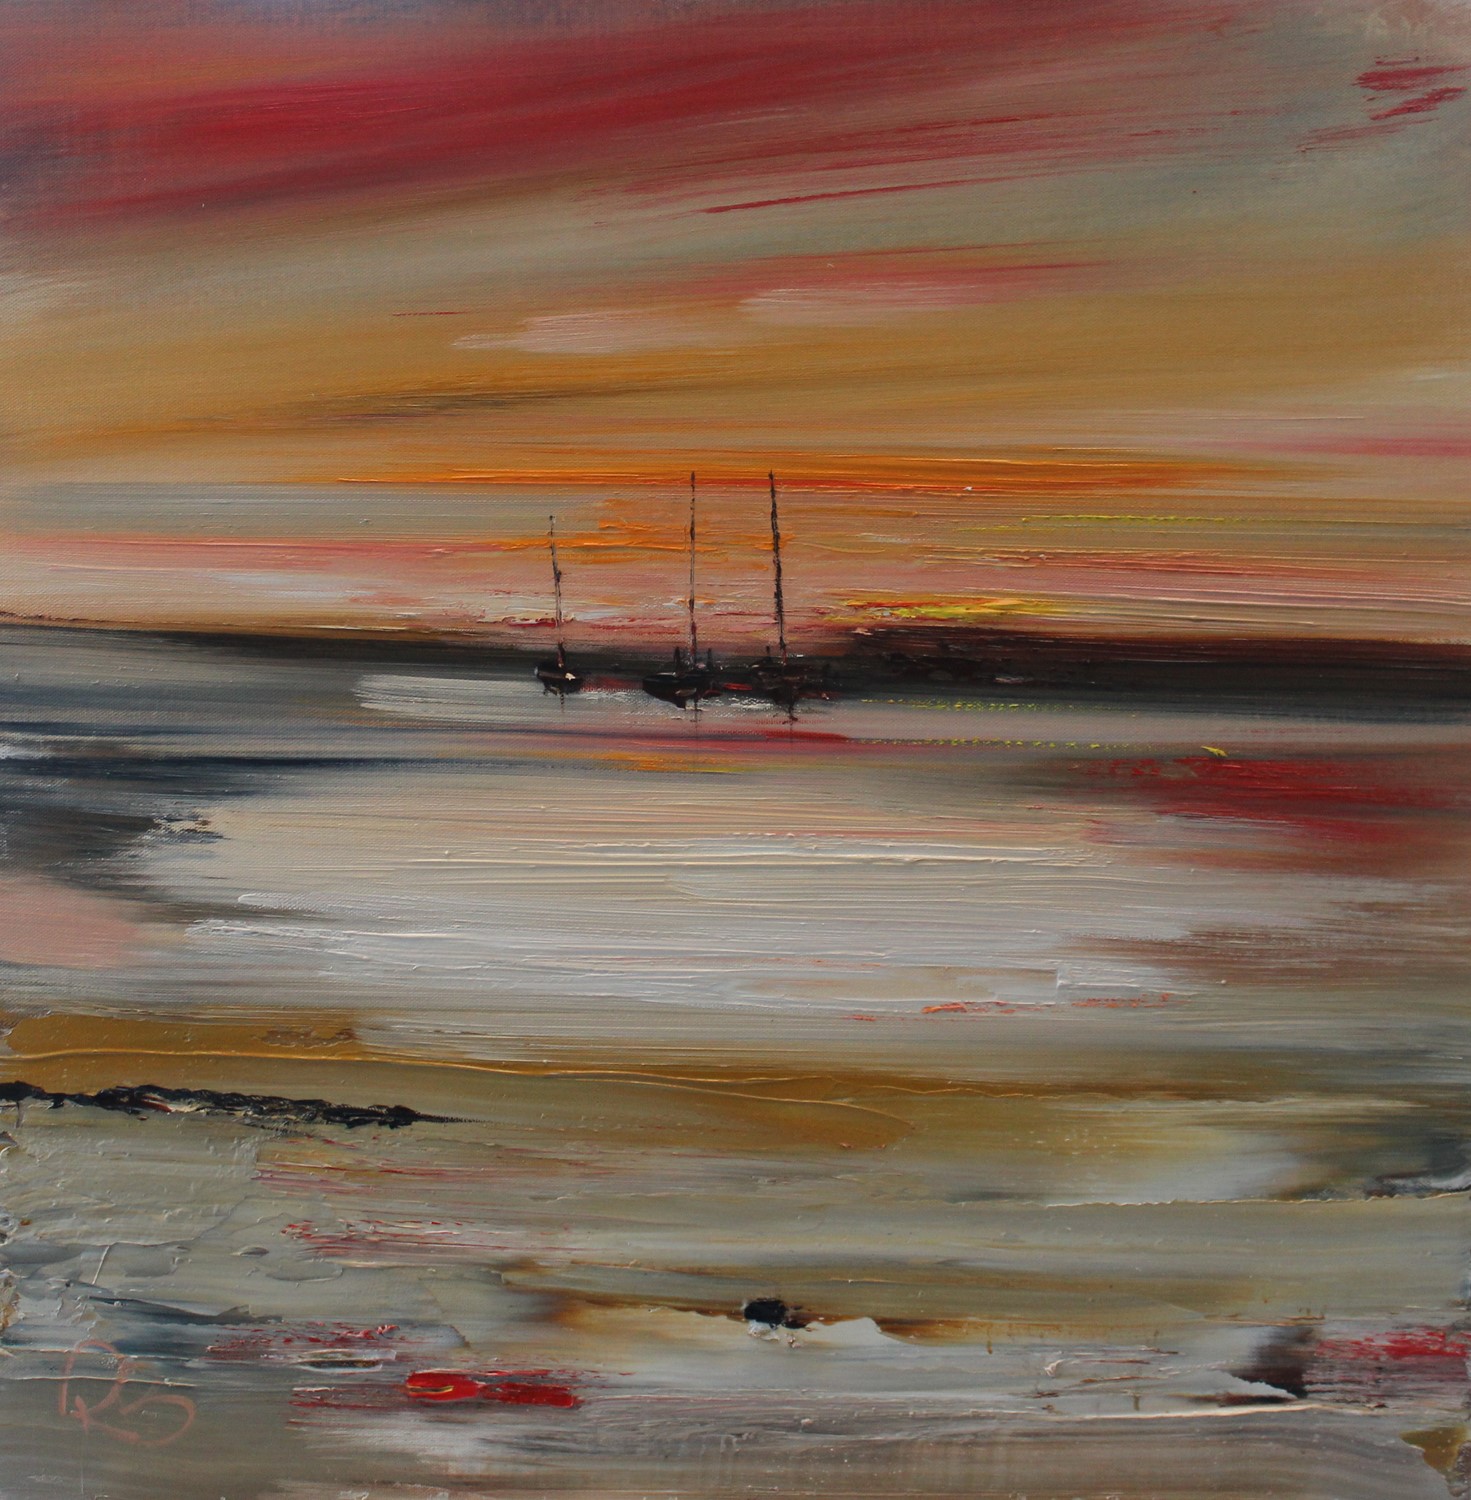 'Distant Yachts' by artist Rosanne Barr